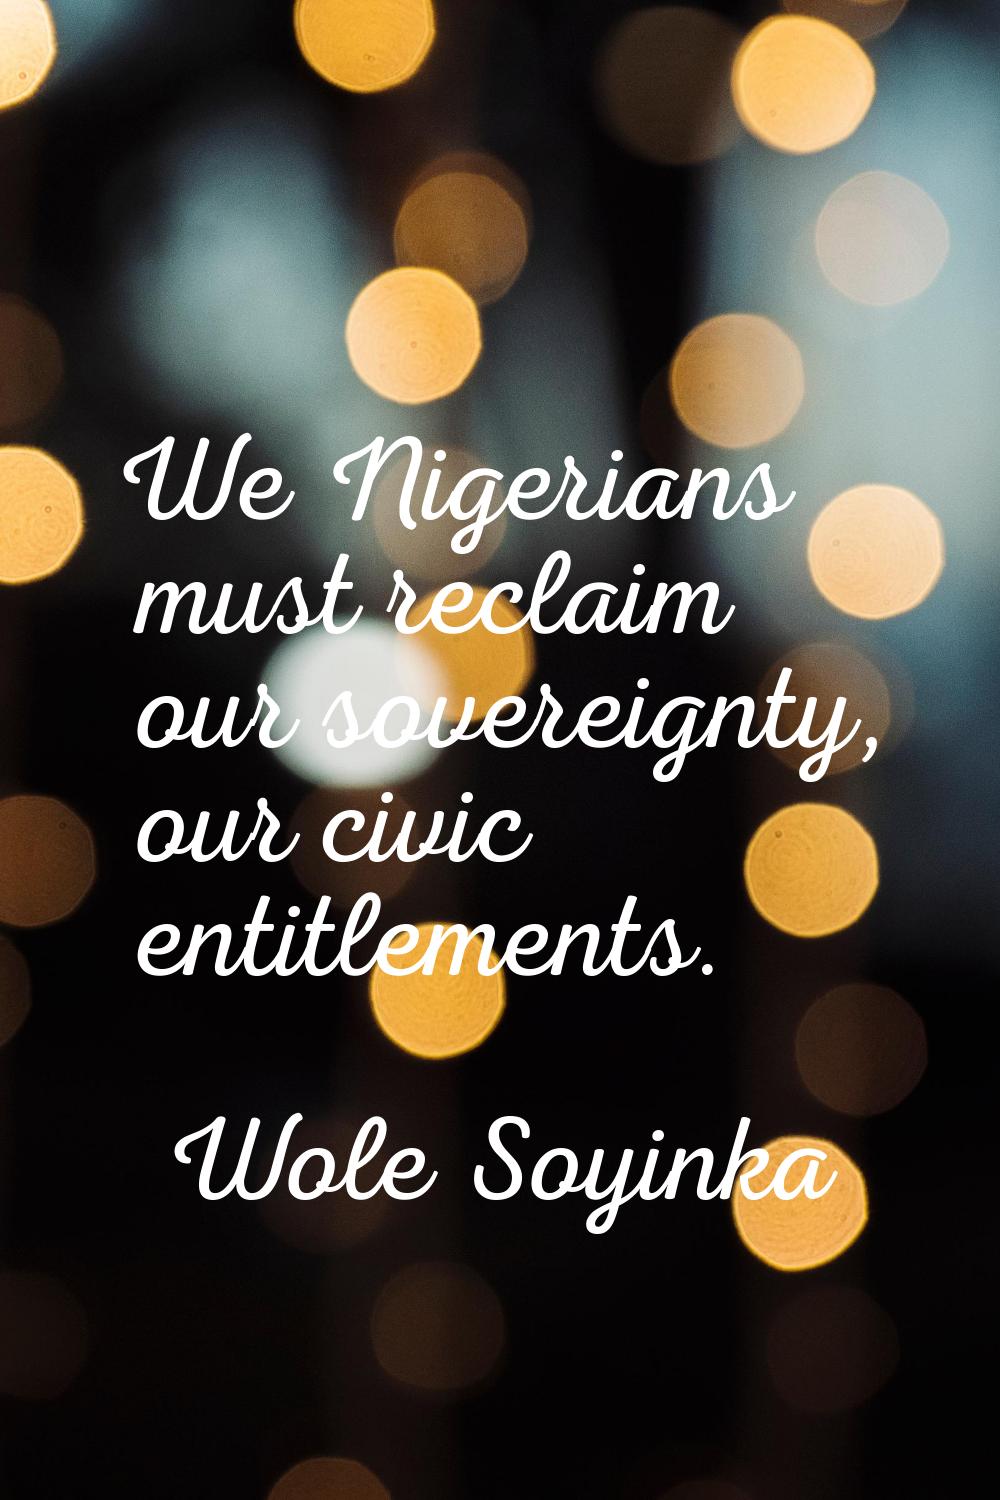 We Nigerians must reclaim our sovereignty, our civic entitlements.